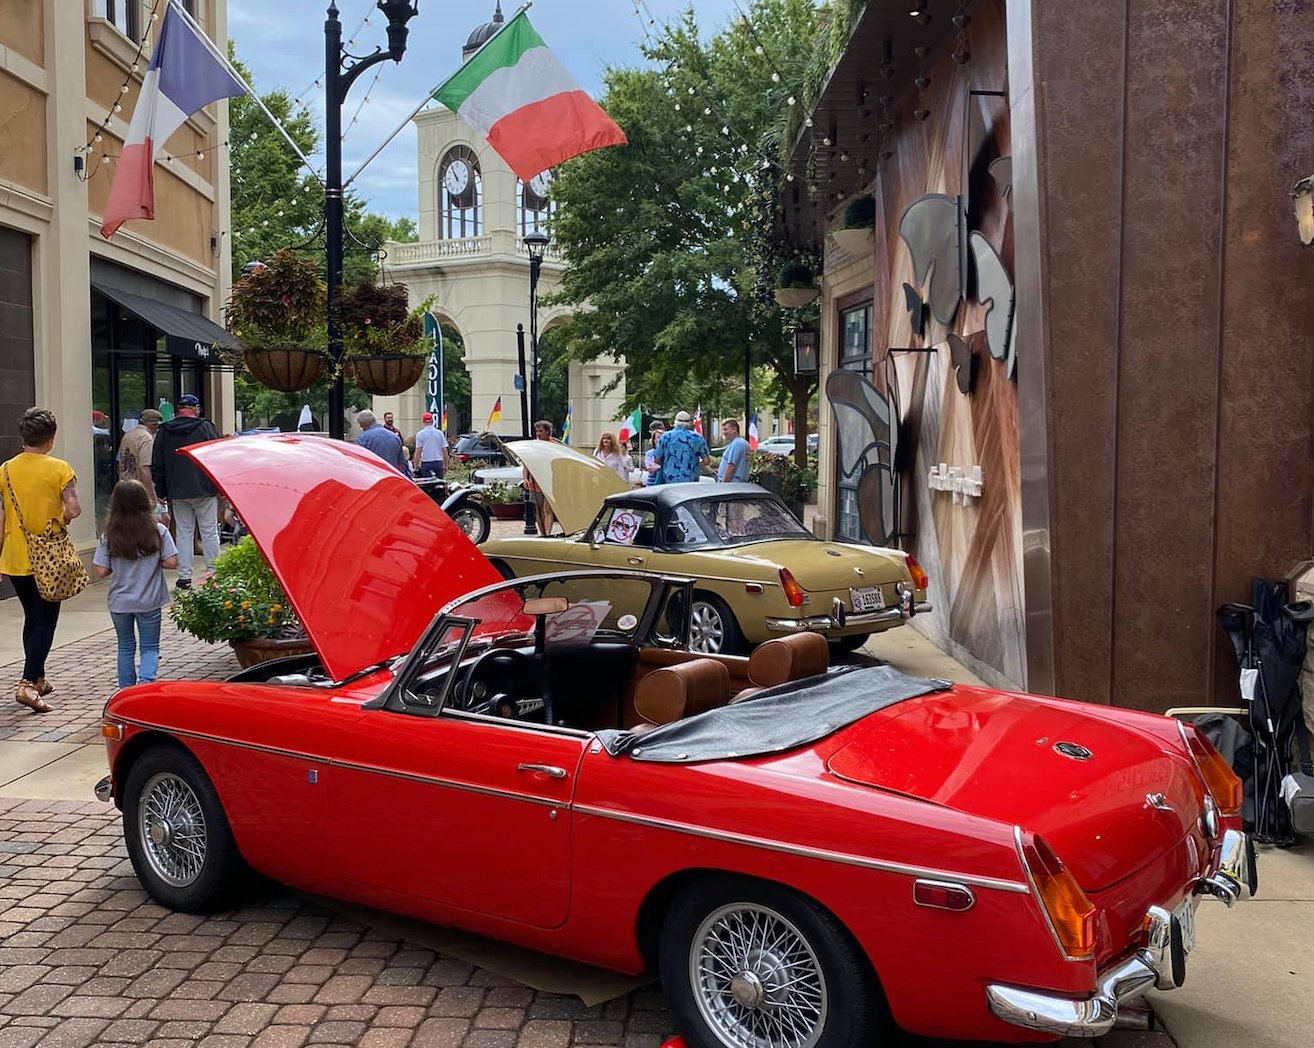 Classic European cars will be on display at the Renaissance at Colony Park this weekend for the annual Euro Fest car show.